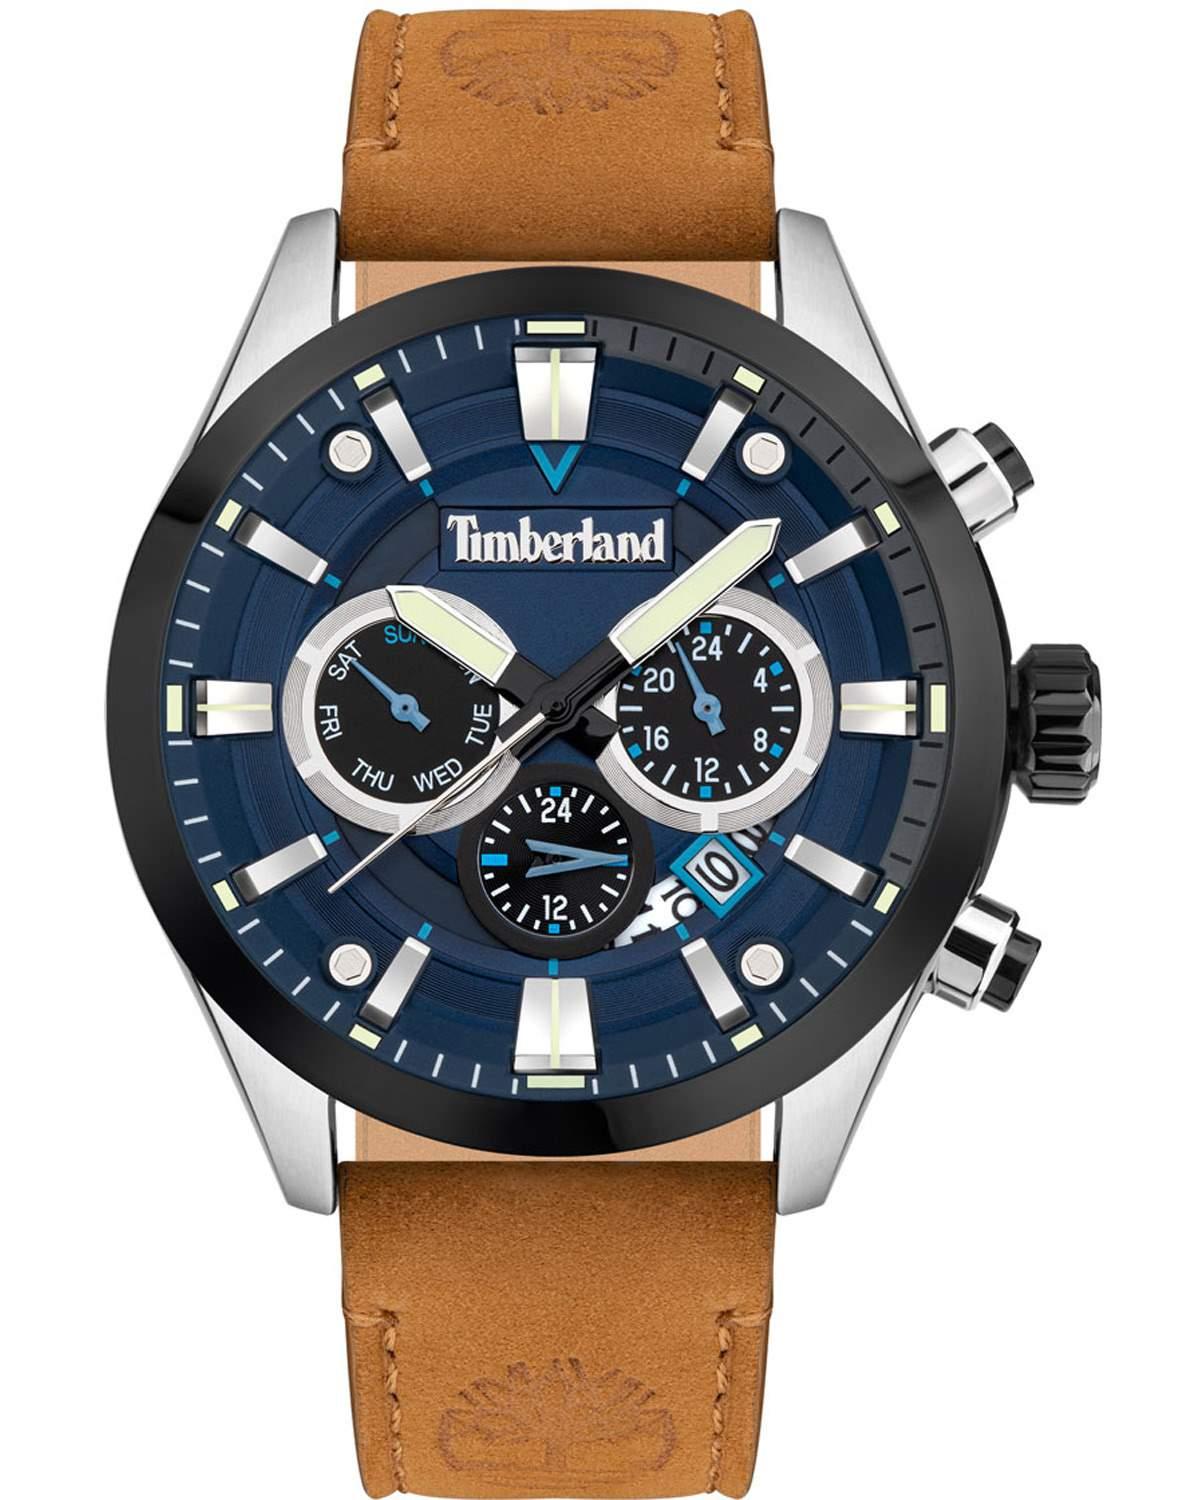 TIMBERLAND TIDEMARK - TDWJF2001901, Silver case with Brown Leather strap